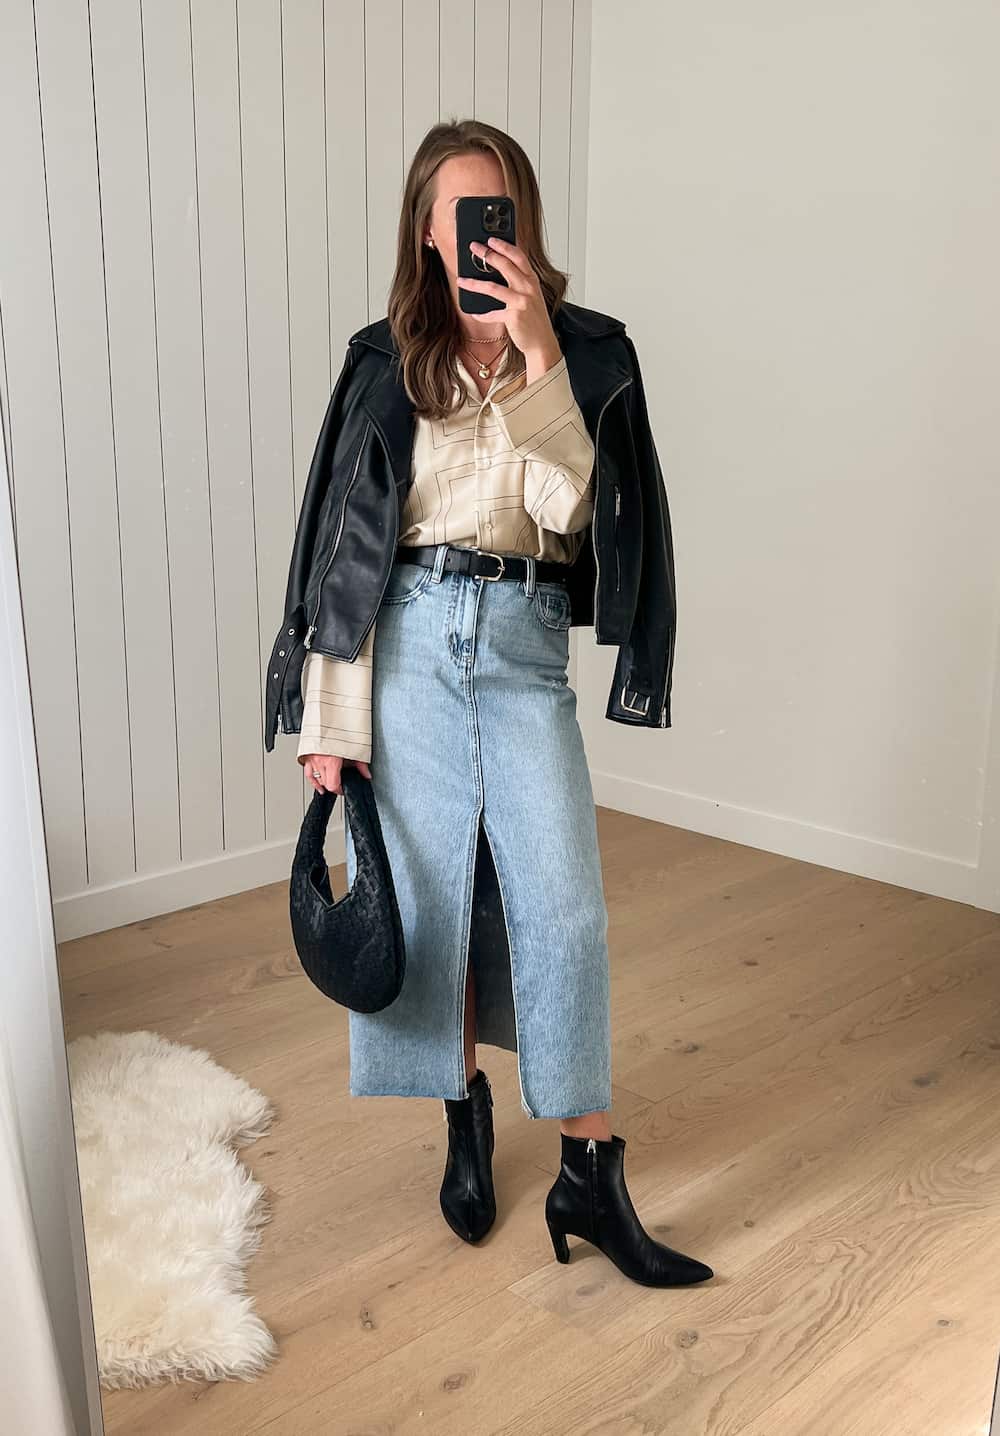 Christal wearing a denim midi skirt with black booties, a silk button up and a black leather jacket.